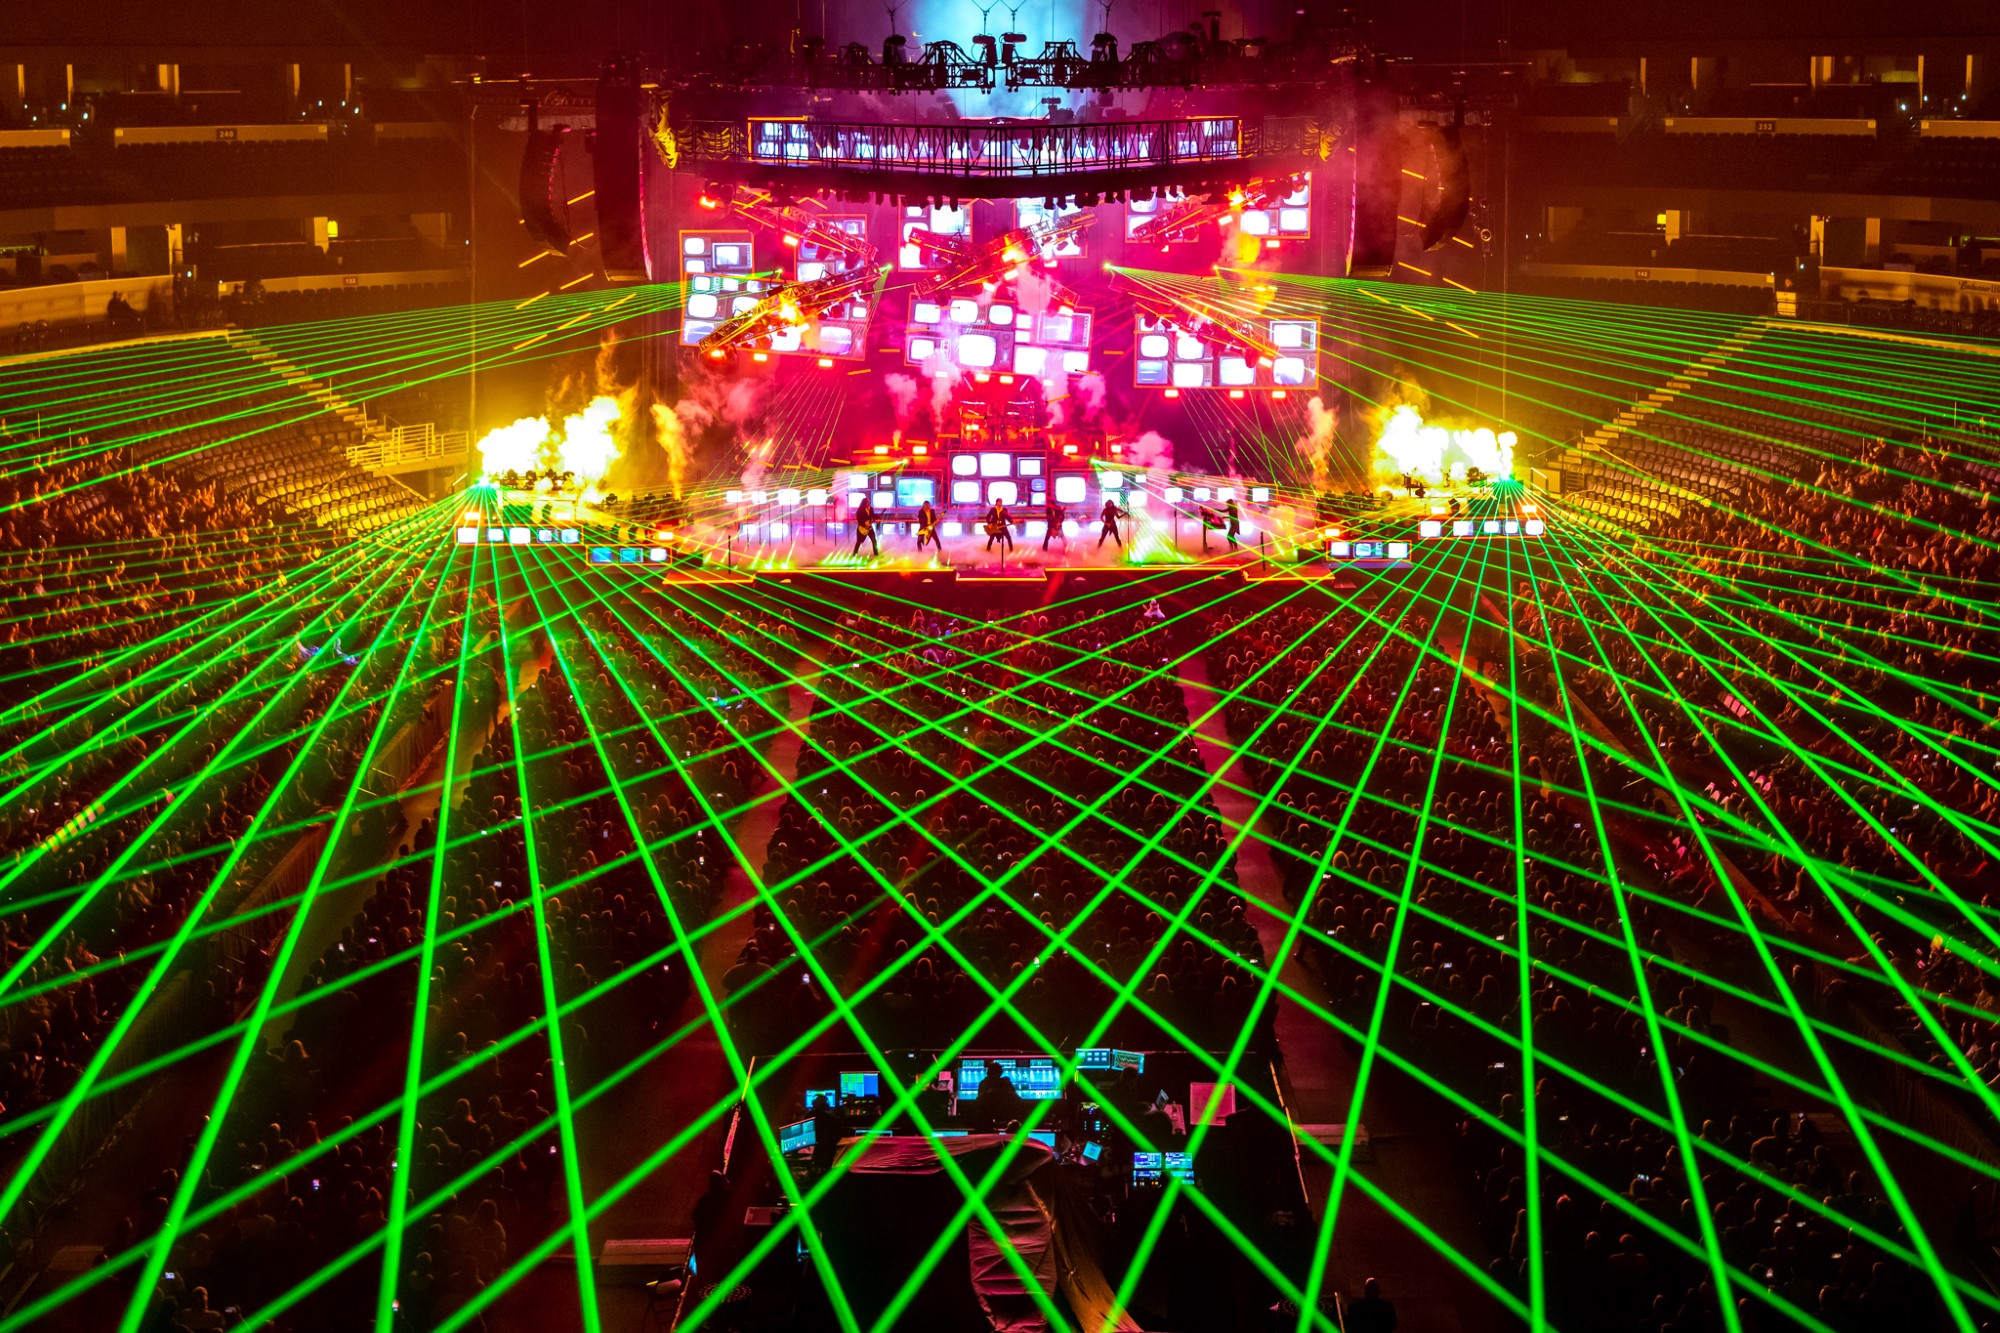 Trans-Siberian Orchestra - The Ghosts of Christmas Eve - the best of TSO and more - December 2022 - AT&T Center